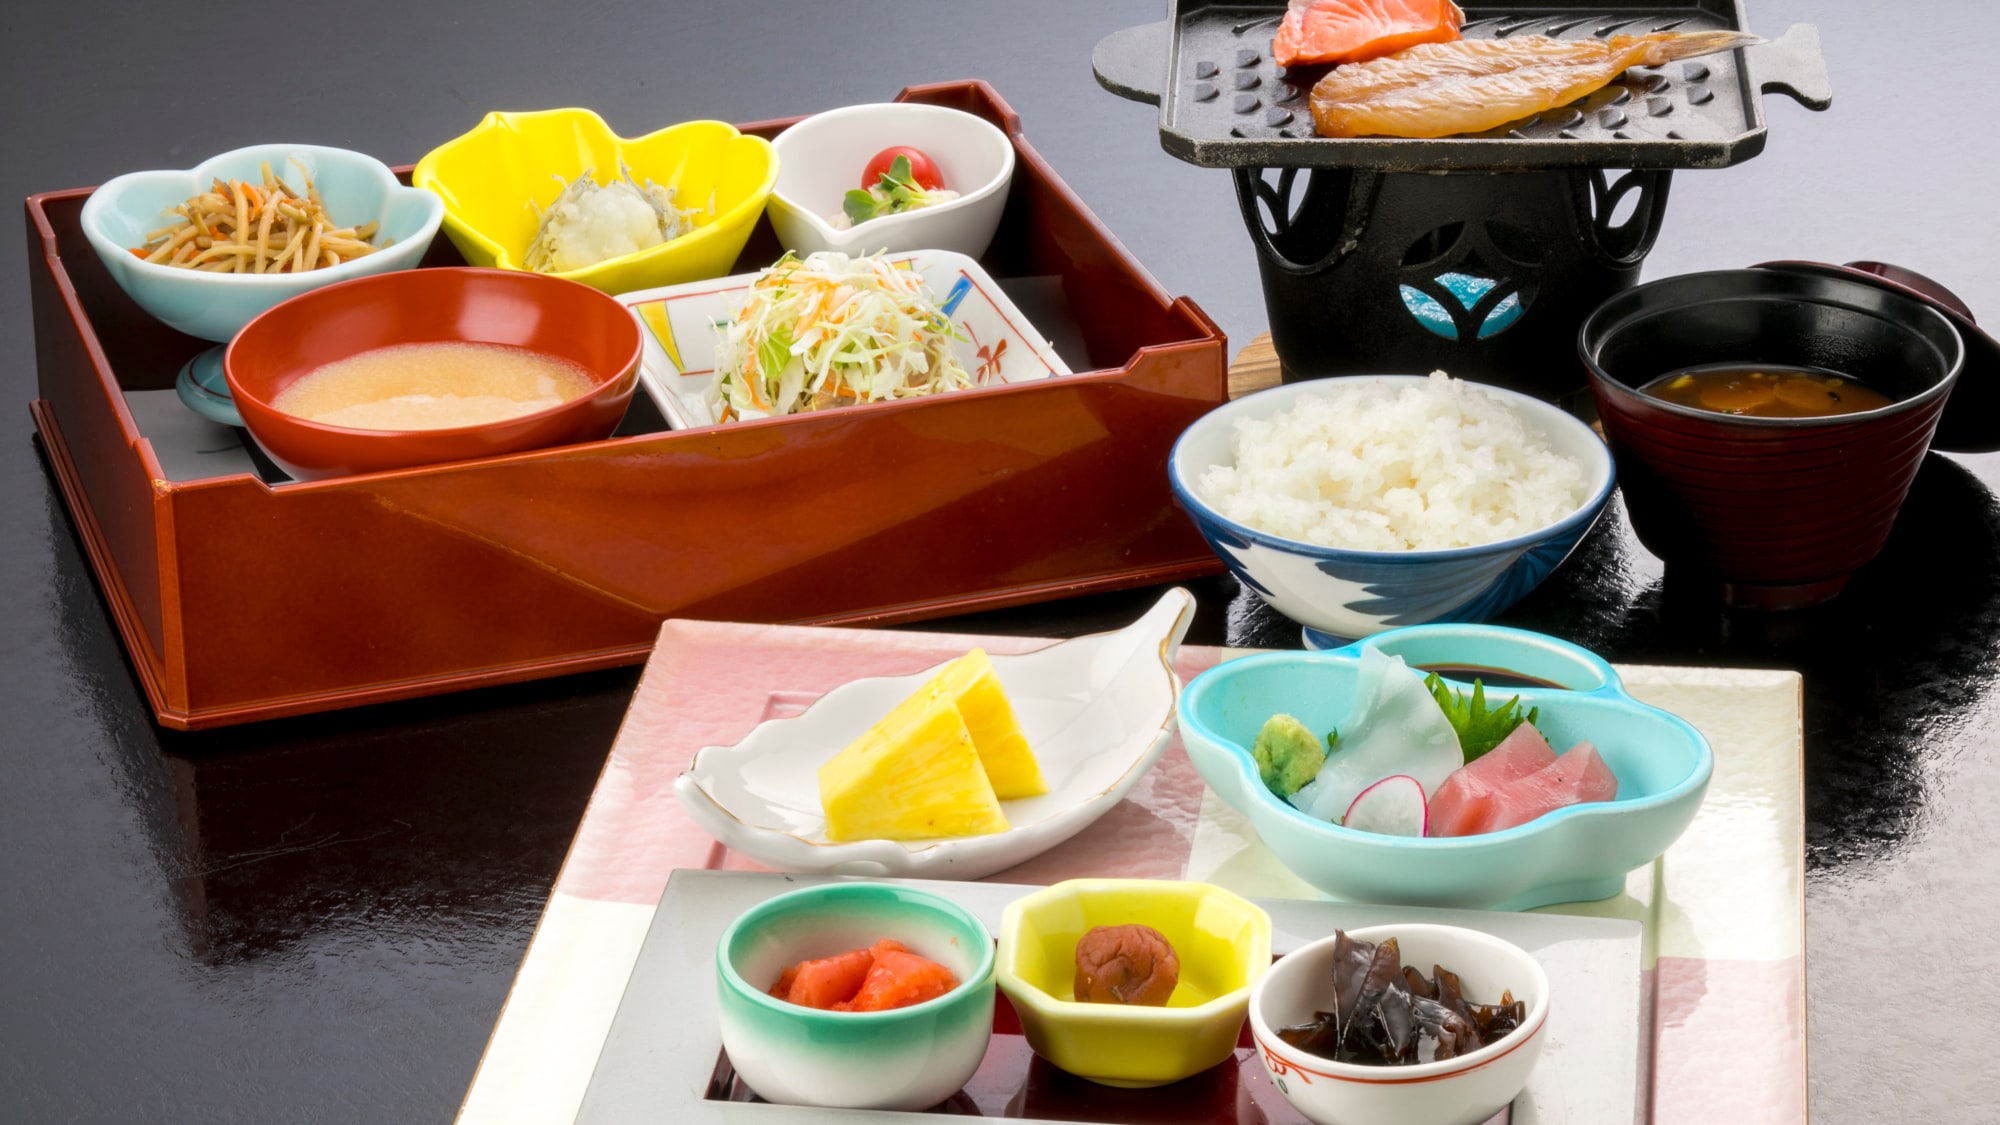 [Breakfast] Available at "Japanese set meal"